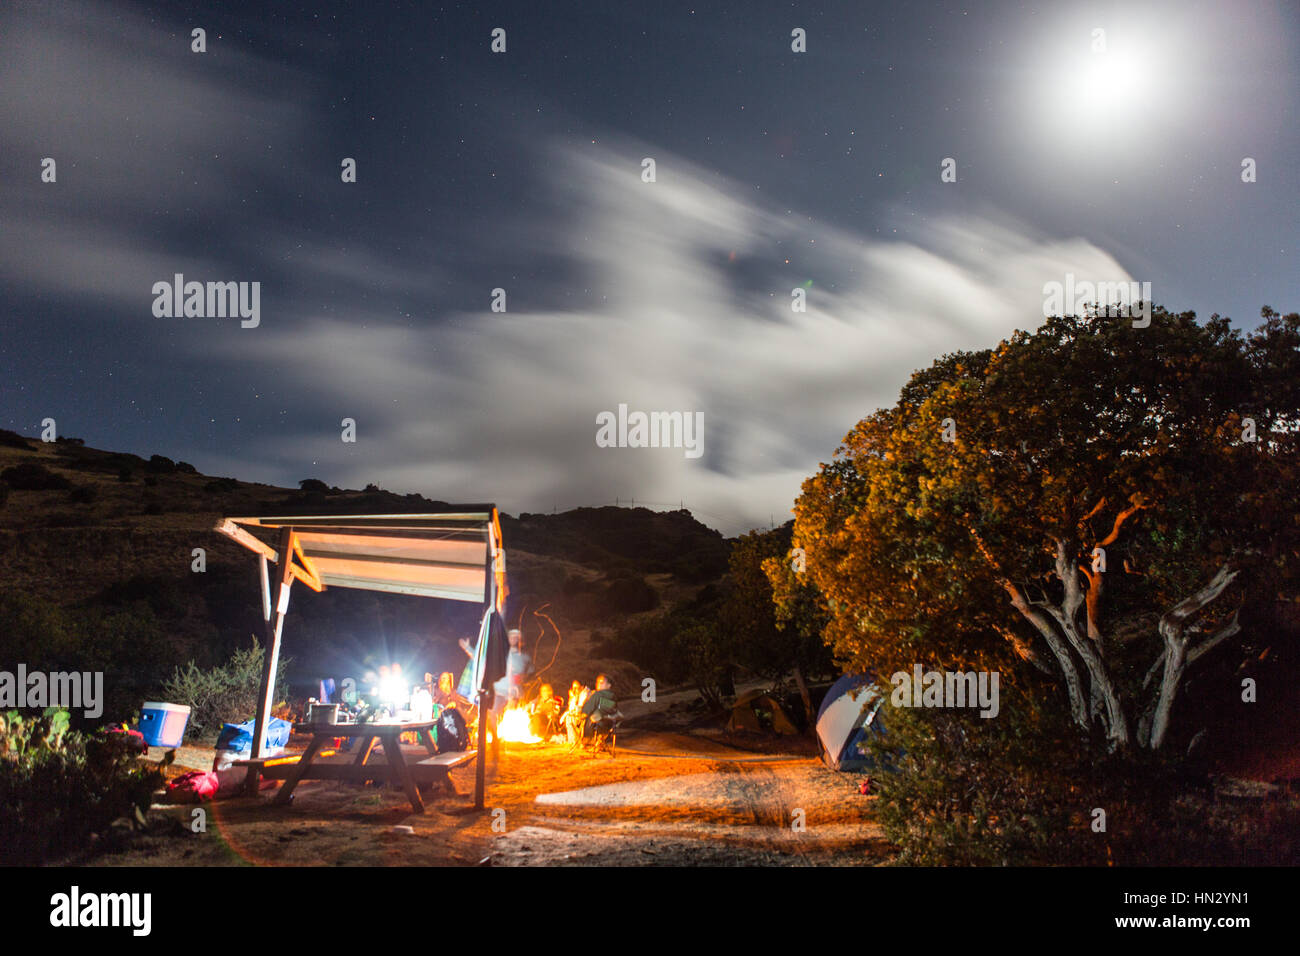 Campers gather around a campfire at Two Harbors, Catalina Island. Stock Photo